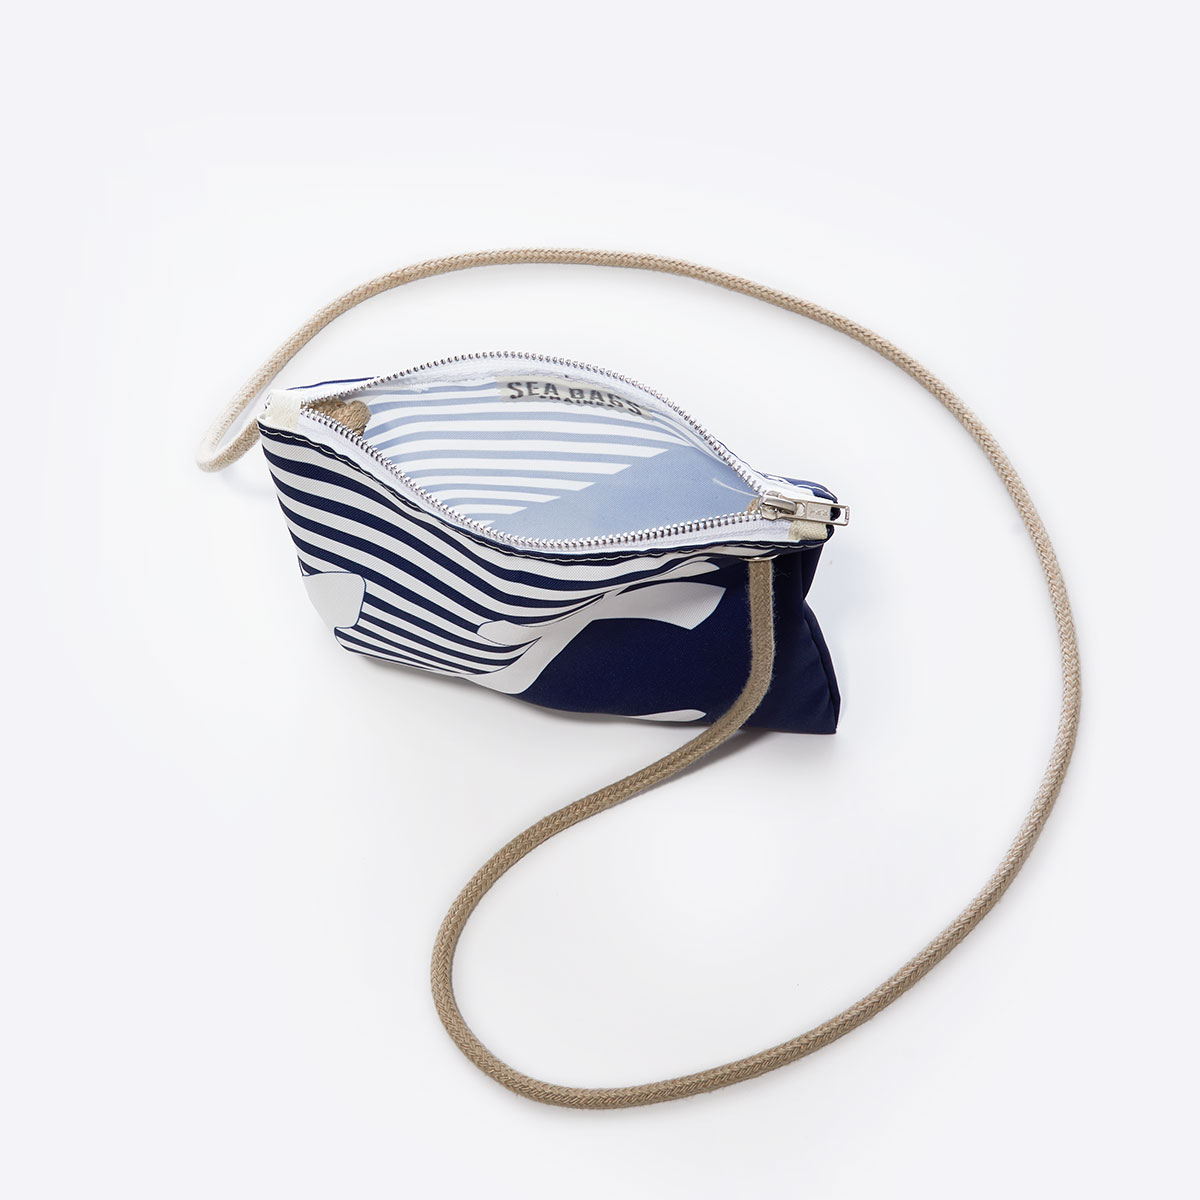 inside view of a a white anchor divides a solid navy blue bottom right triangle and a navy and white striped top left triangle, printed on a recycled sail cloth crossbody bag with tan rope handle